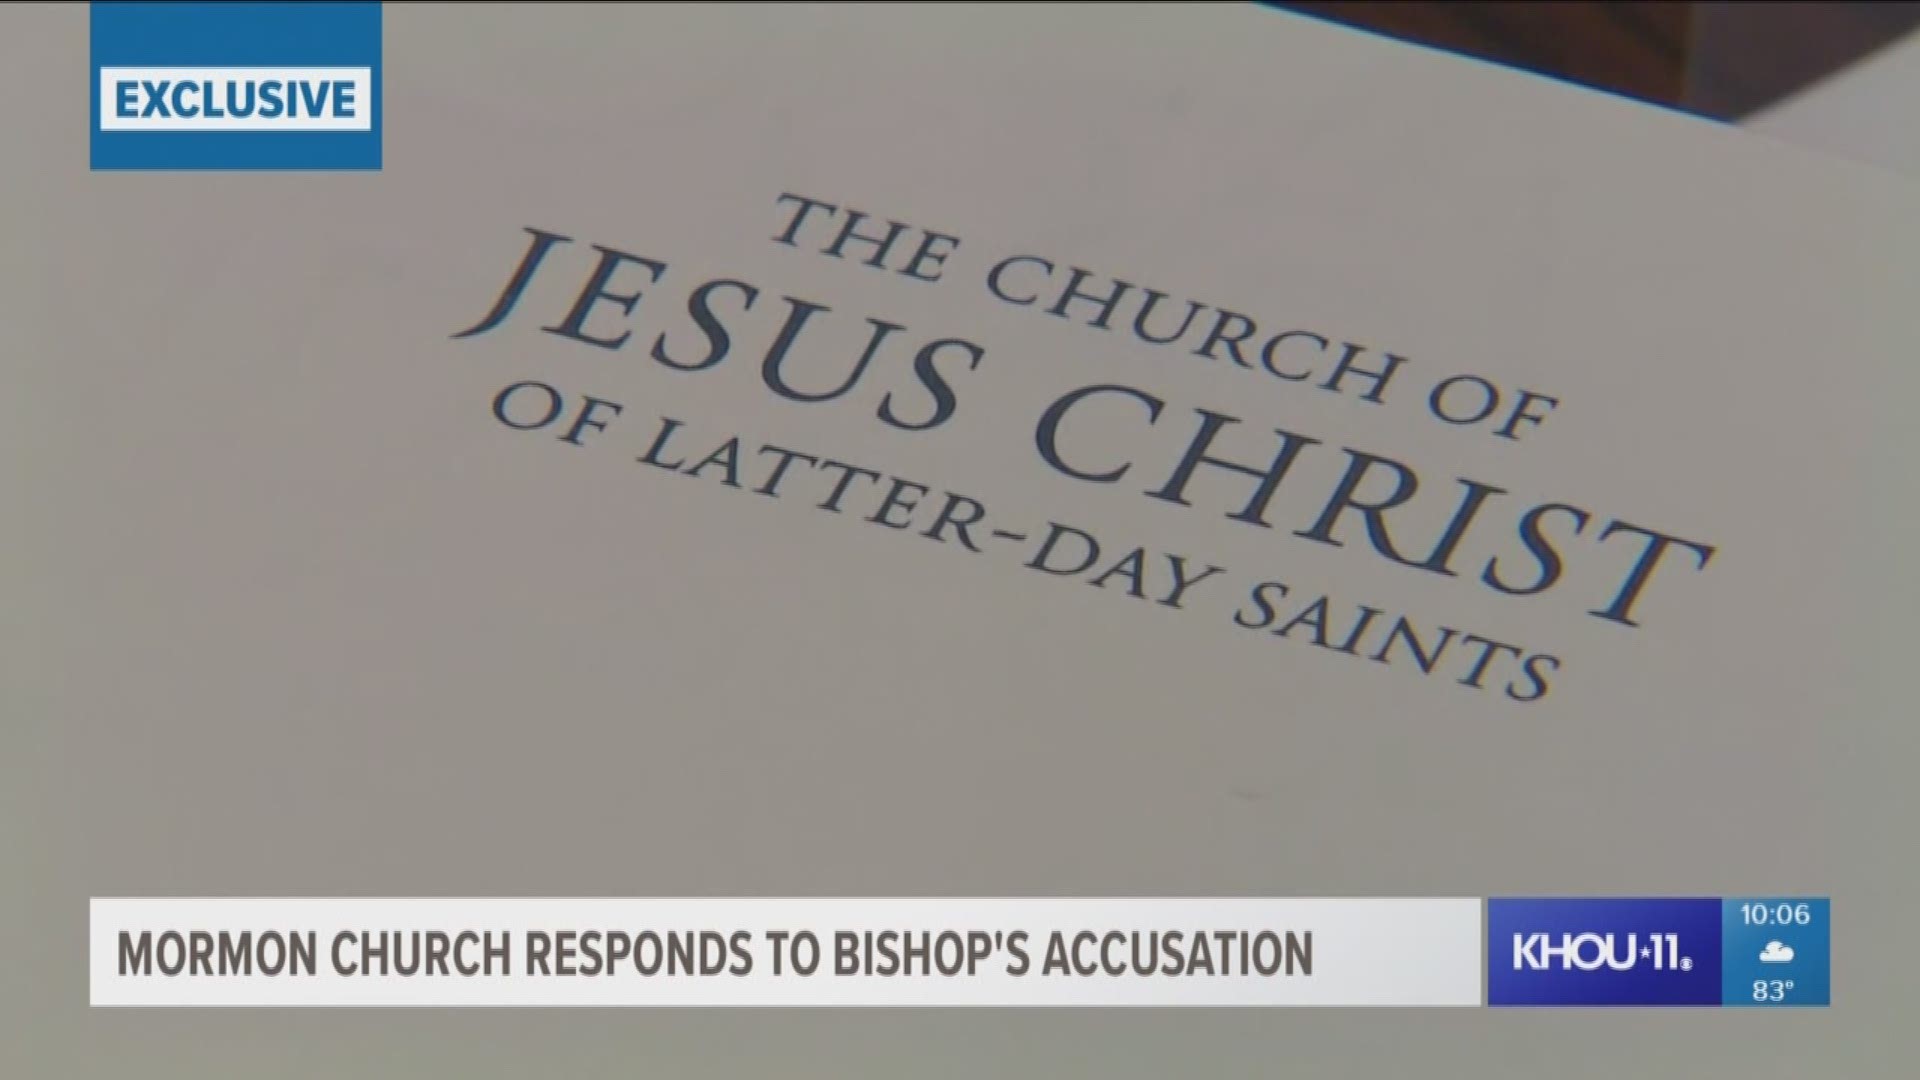 A list of questions too graphic to post online or show on television got former bishop Sam Young so upset his reaction earned him excommunication from the Church of Jesus Christ of Latter-Day Saints.  He was a member for 65 years.